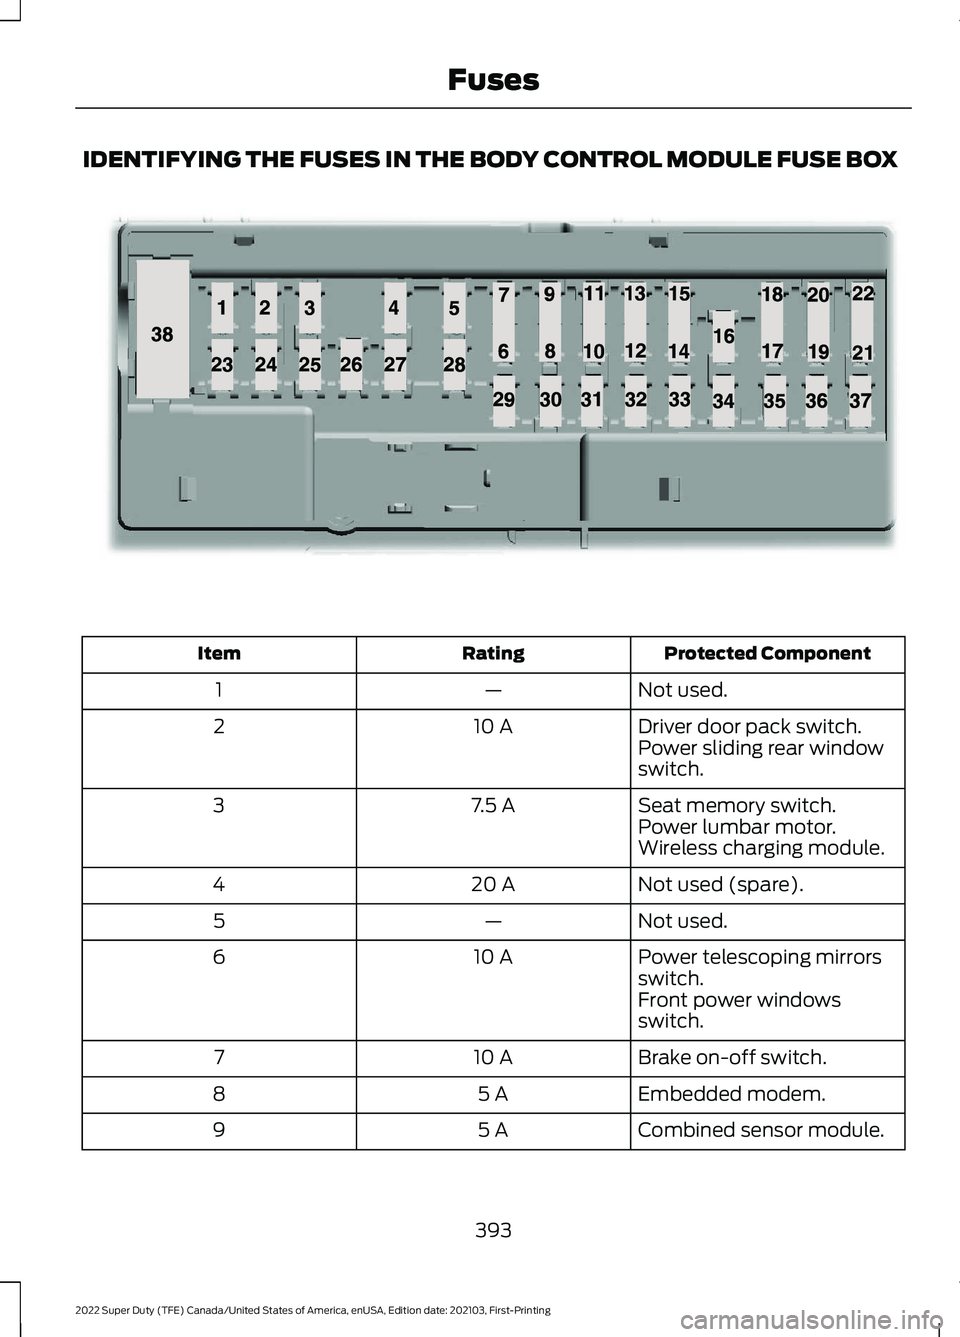 FORD F-600 2022  Owners Manual IDENTIFYING THE FUSES IN THE BODY CONTROL MODULE FUSE BOX
Protected Component
Rating
Item
Not used.
—
1
Driver door pack switch.
10 A
2
Power sliding rear window
switch.
Seat memory switch.
7.5 A
3
